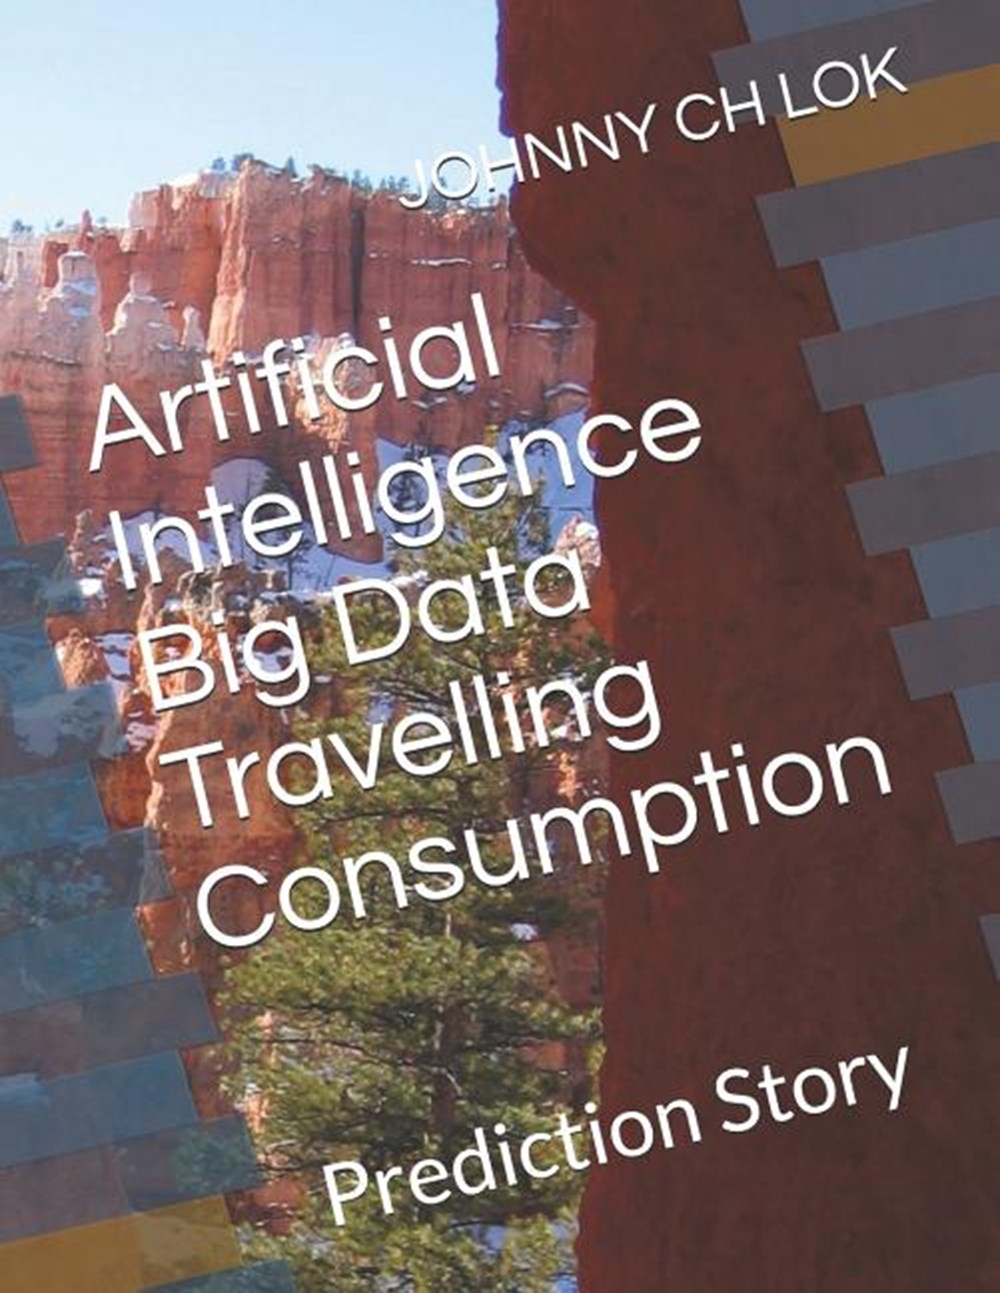 Artificial Intelligence Big Data Travelling Consumption: Prediction Story